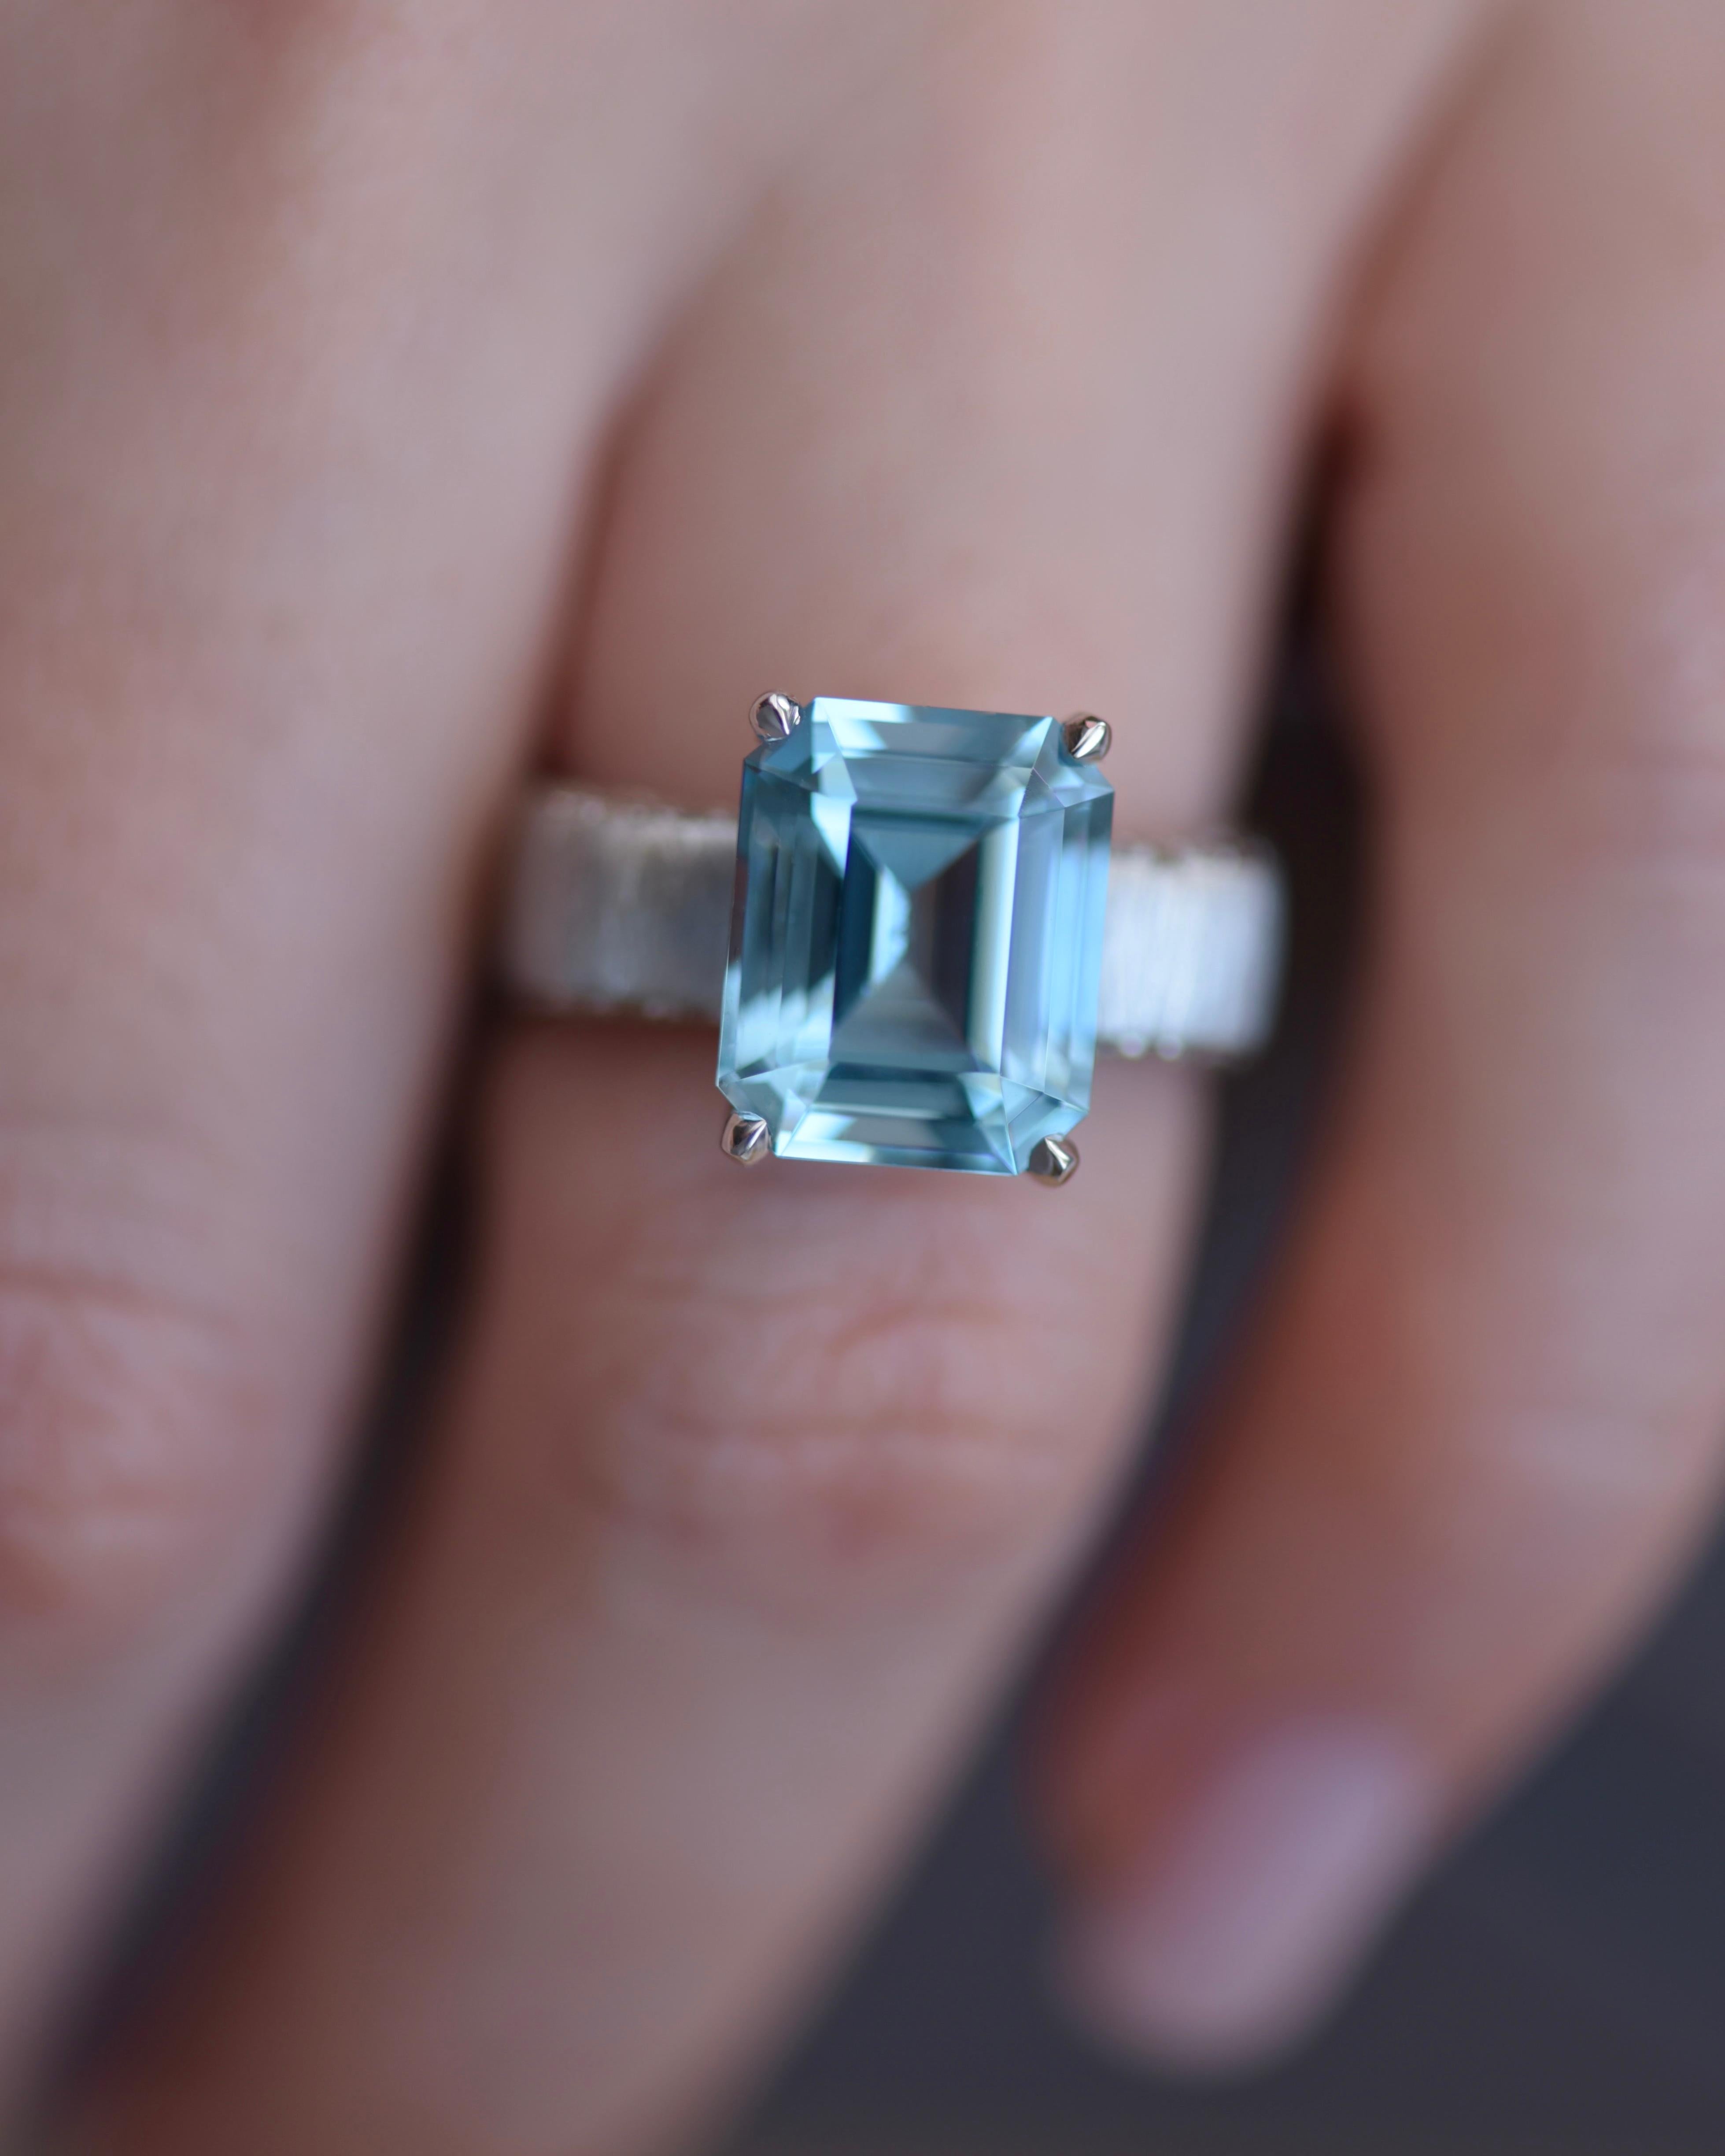 Aquamarine - one of the most famous and beautiful gemstones on the planet
Pale blue aquamarine causes associations with the morning sea, sunny sky, white yacht and fresh wind
Ideal stone for any occasion, especially with small diamonds in a frame of